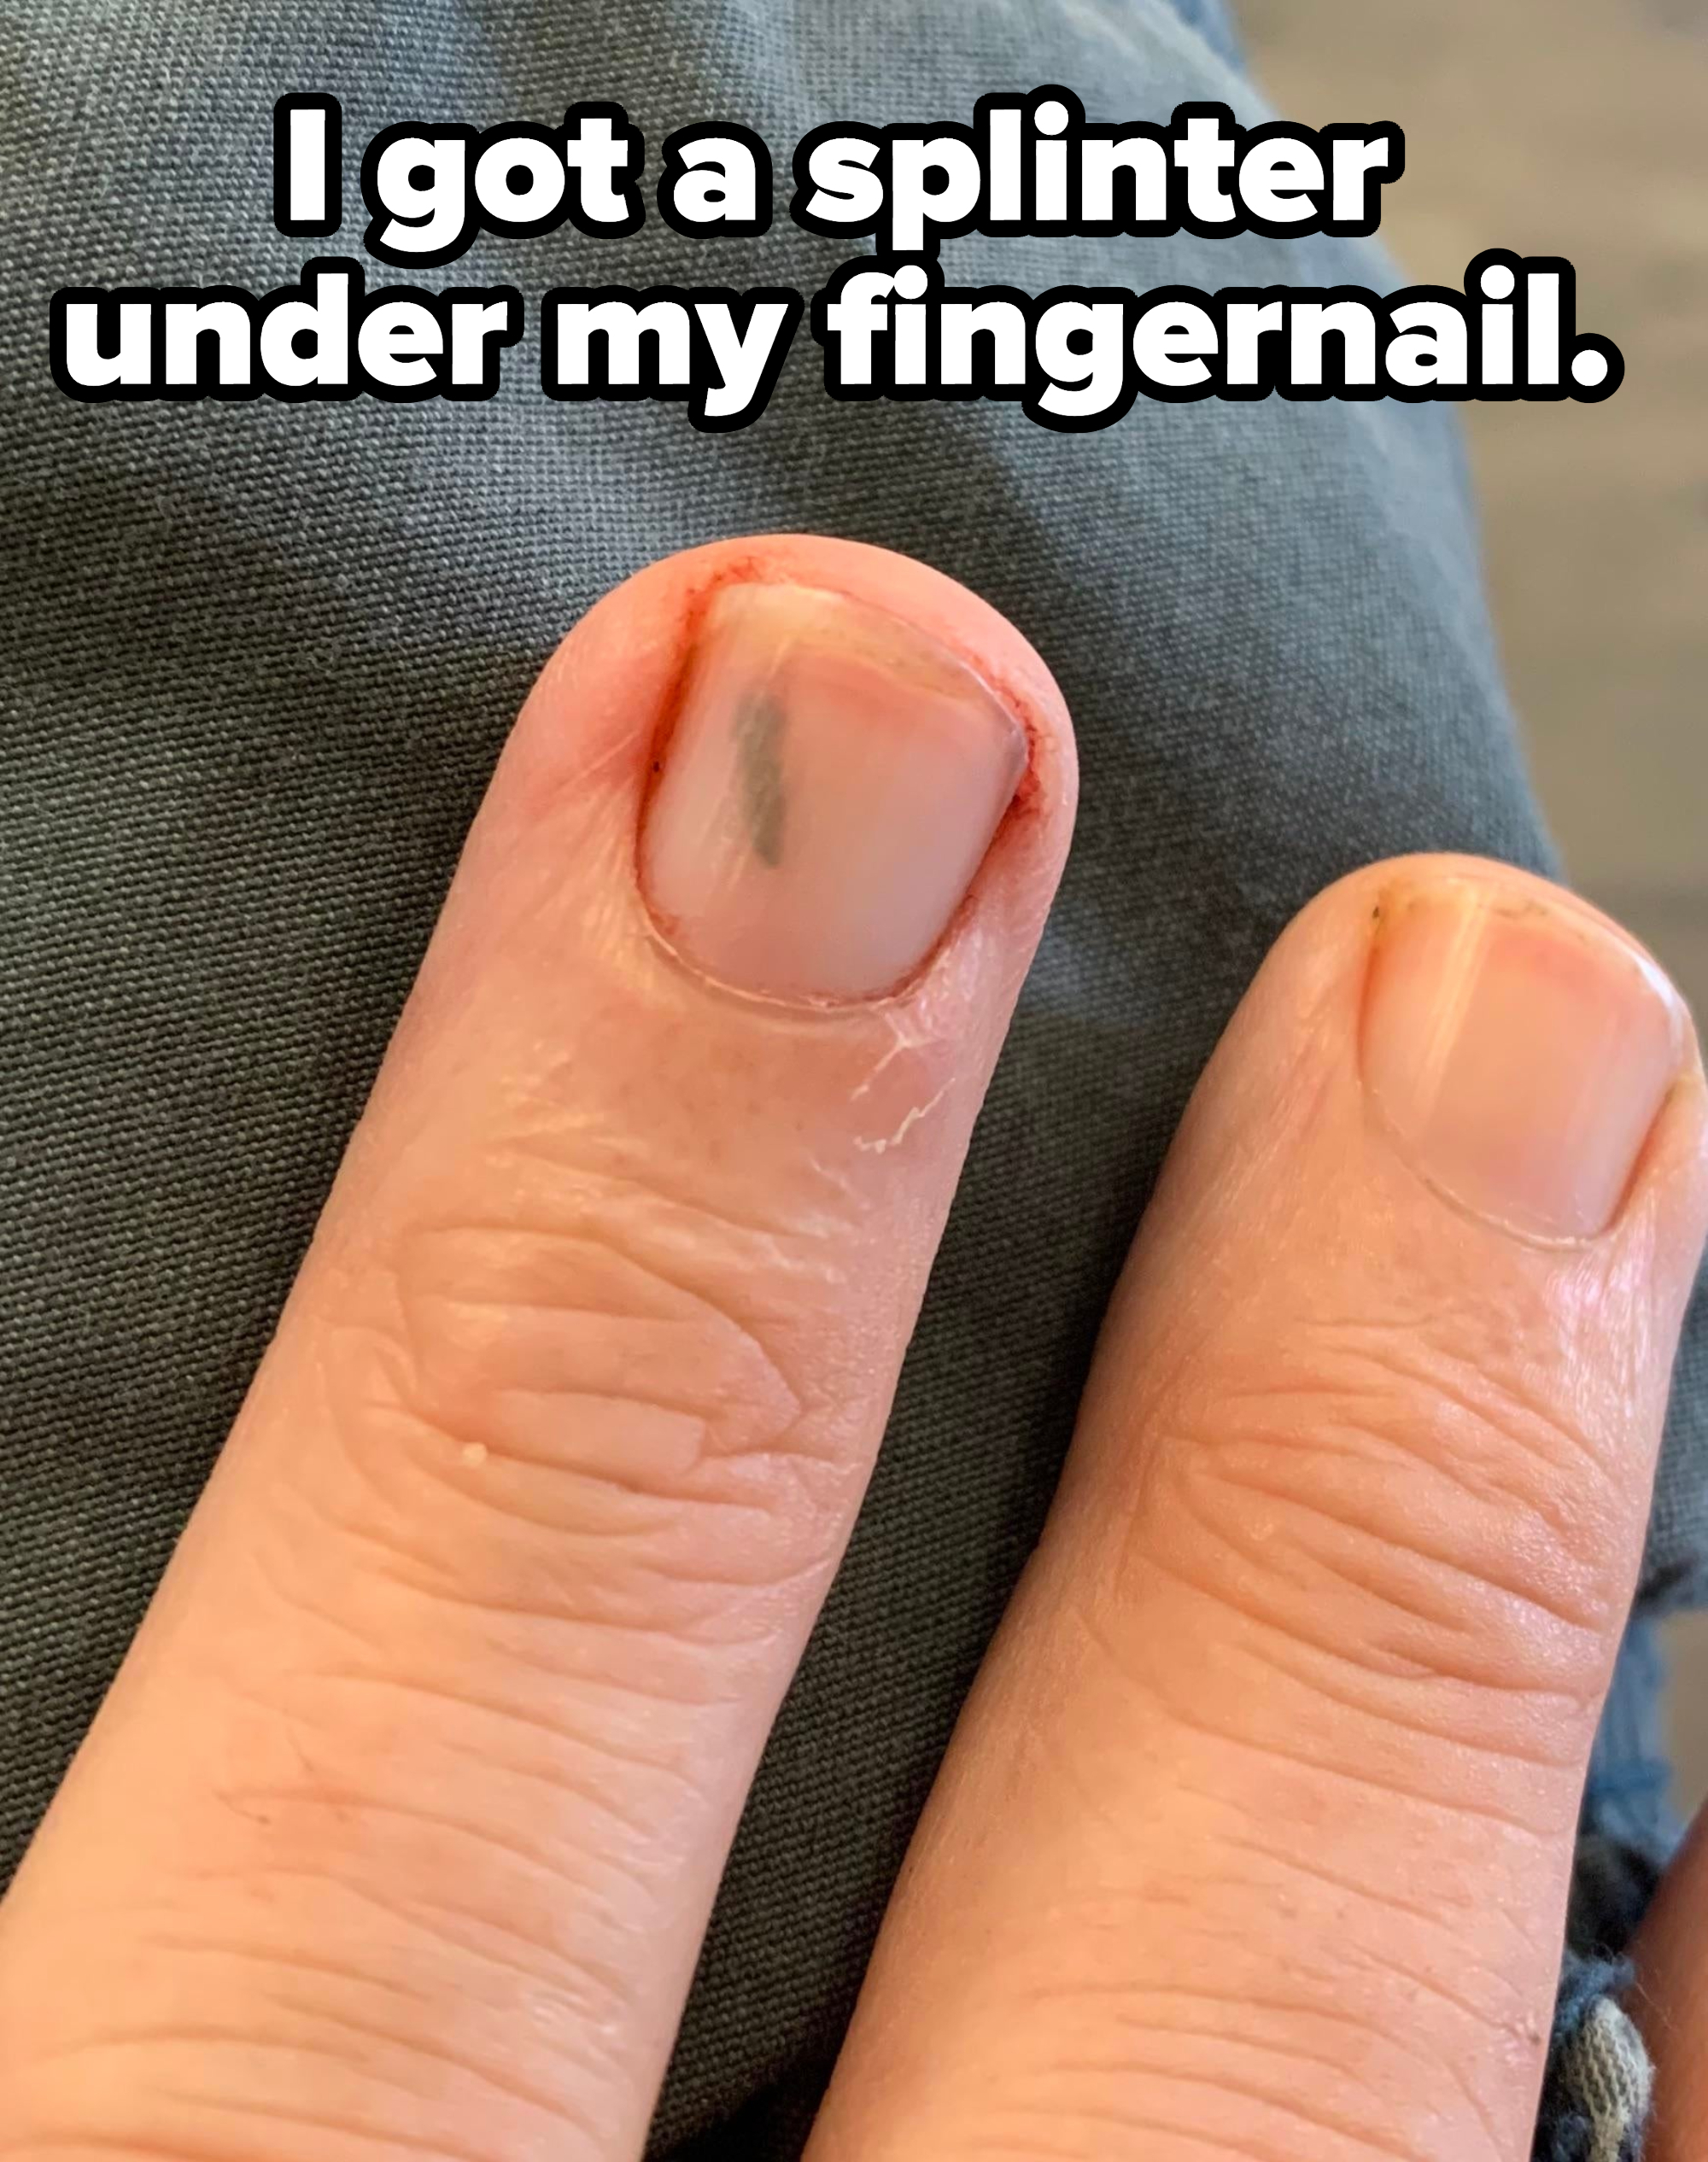 Close-up of a fingernail with a large splinter deep in it, with the caption &quot;I got a splinter under my fingernail&quot;